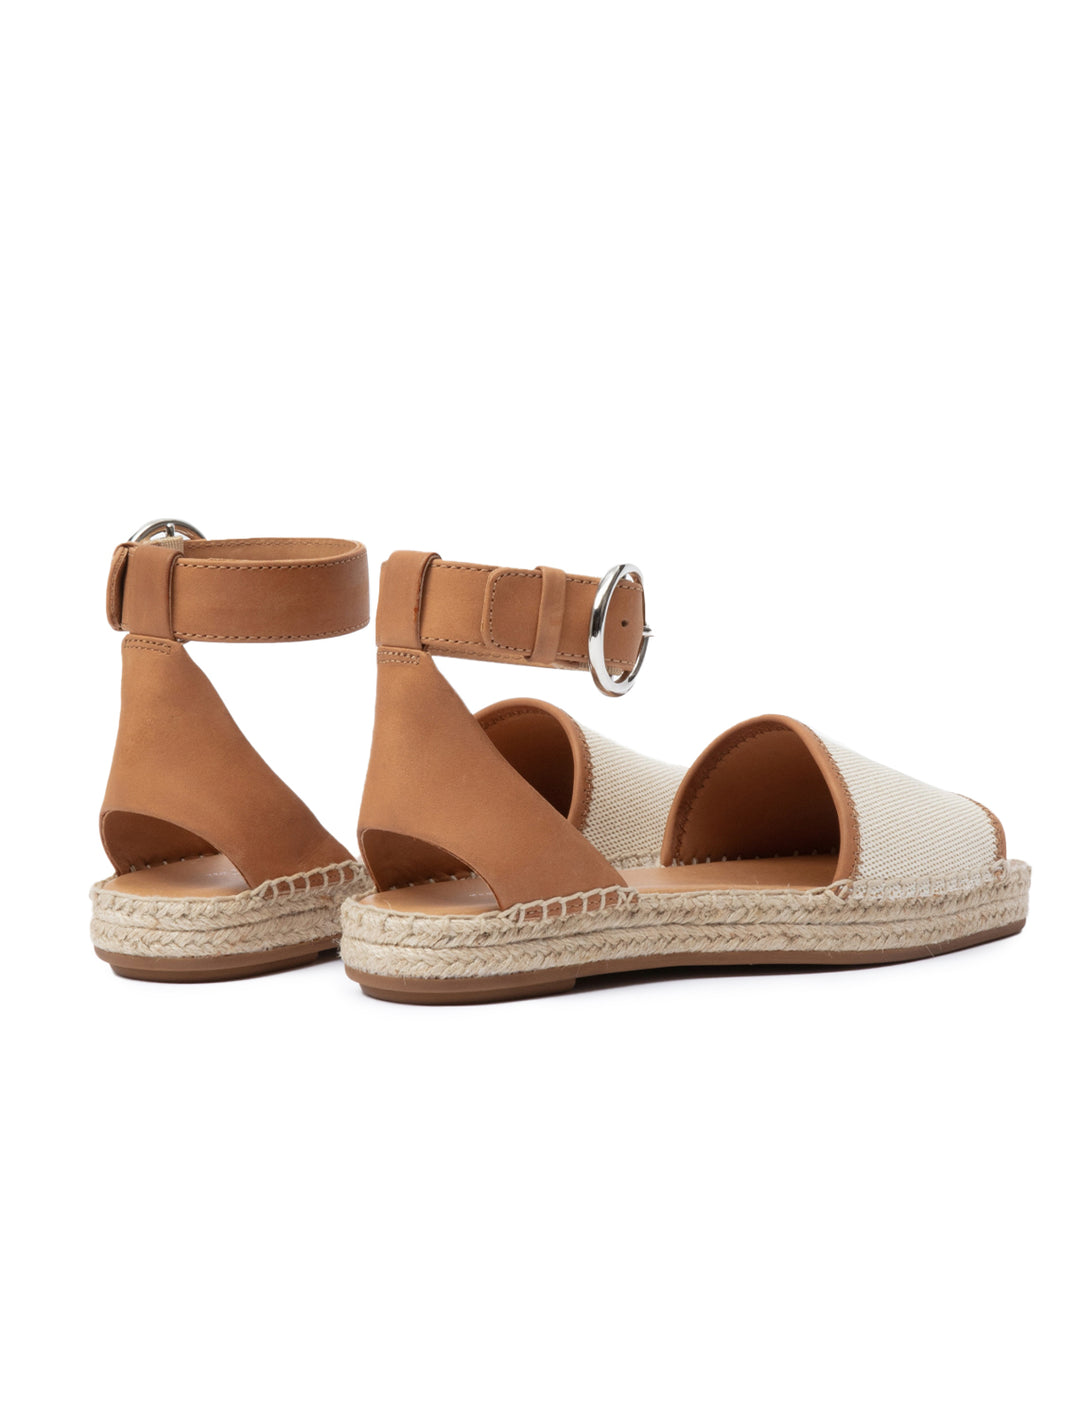 Back angle view of Rag & Bone's anteros peep toe espadrille in natural.